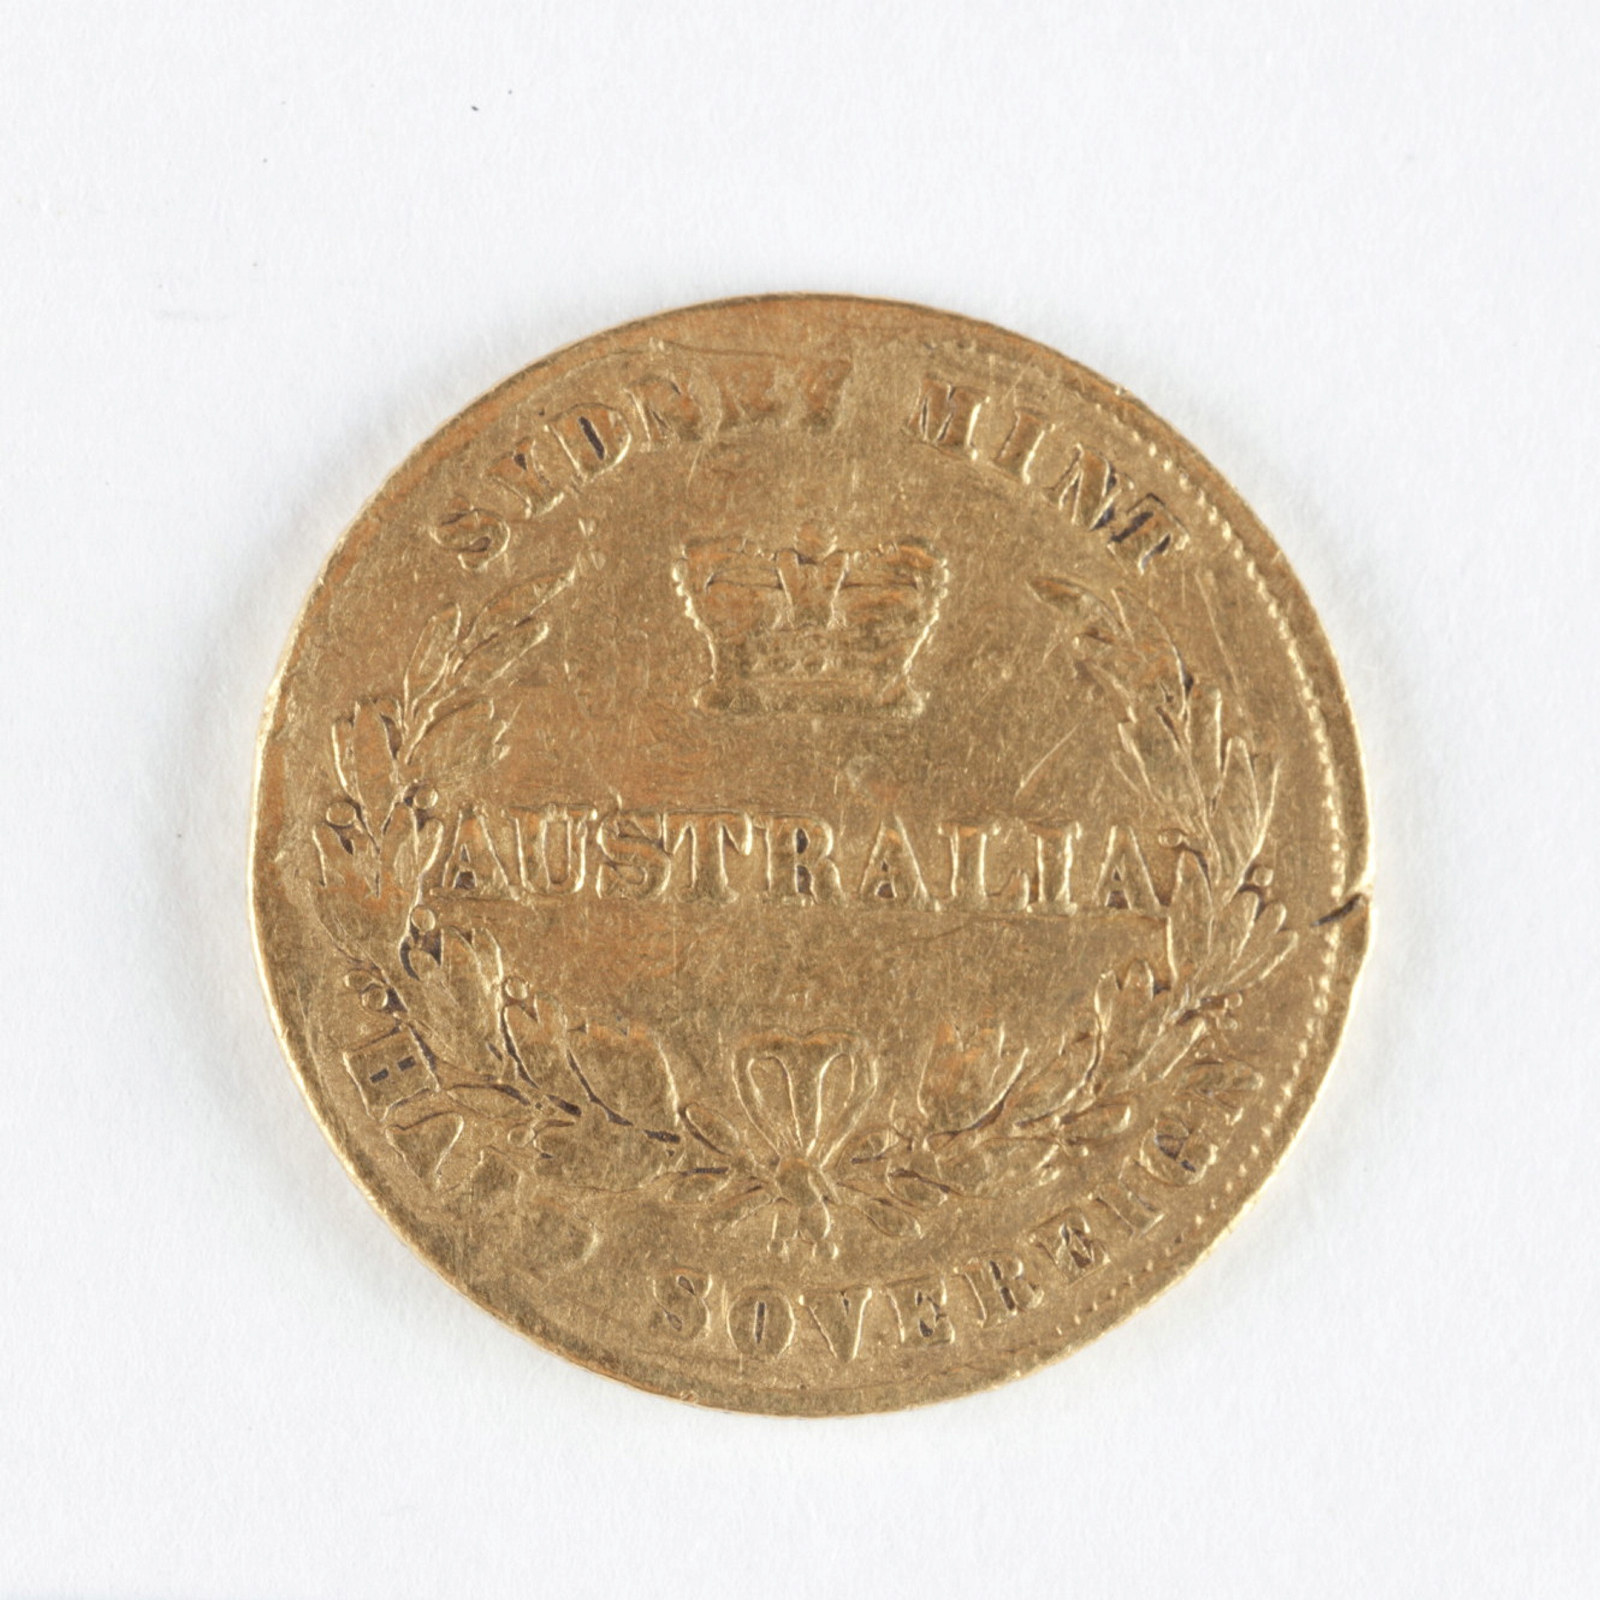 Reverse of gold coin.